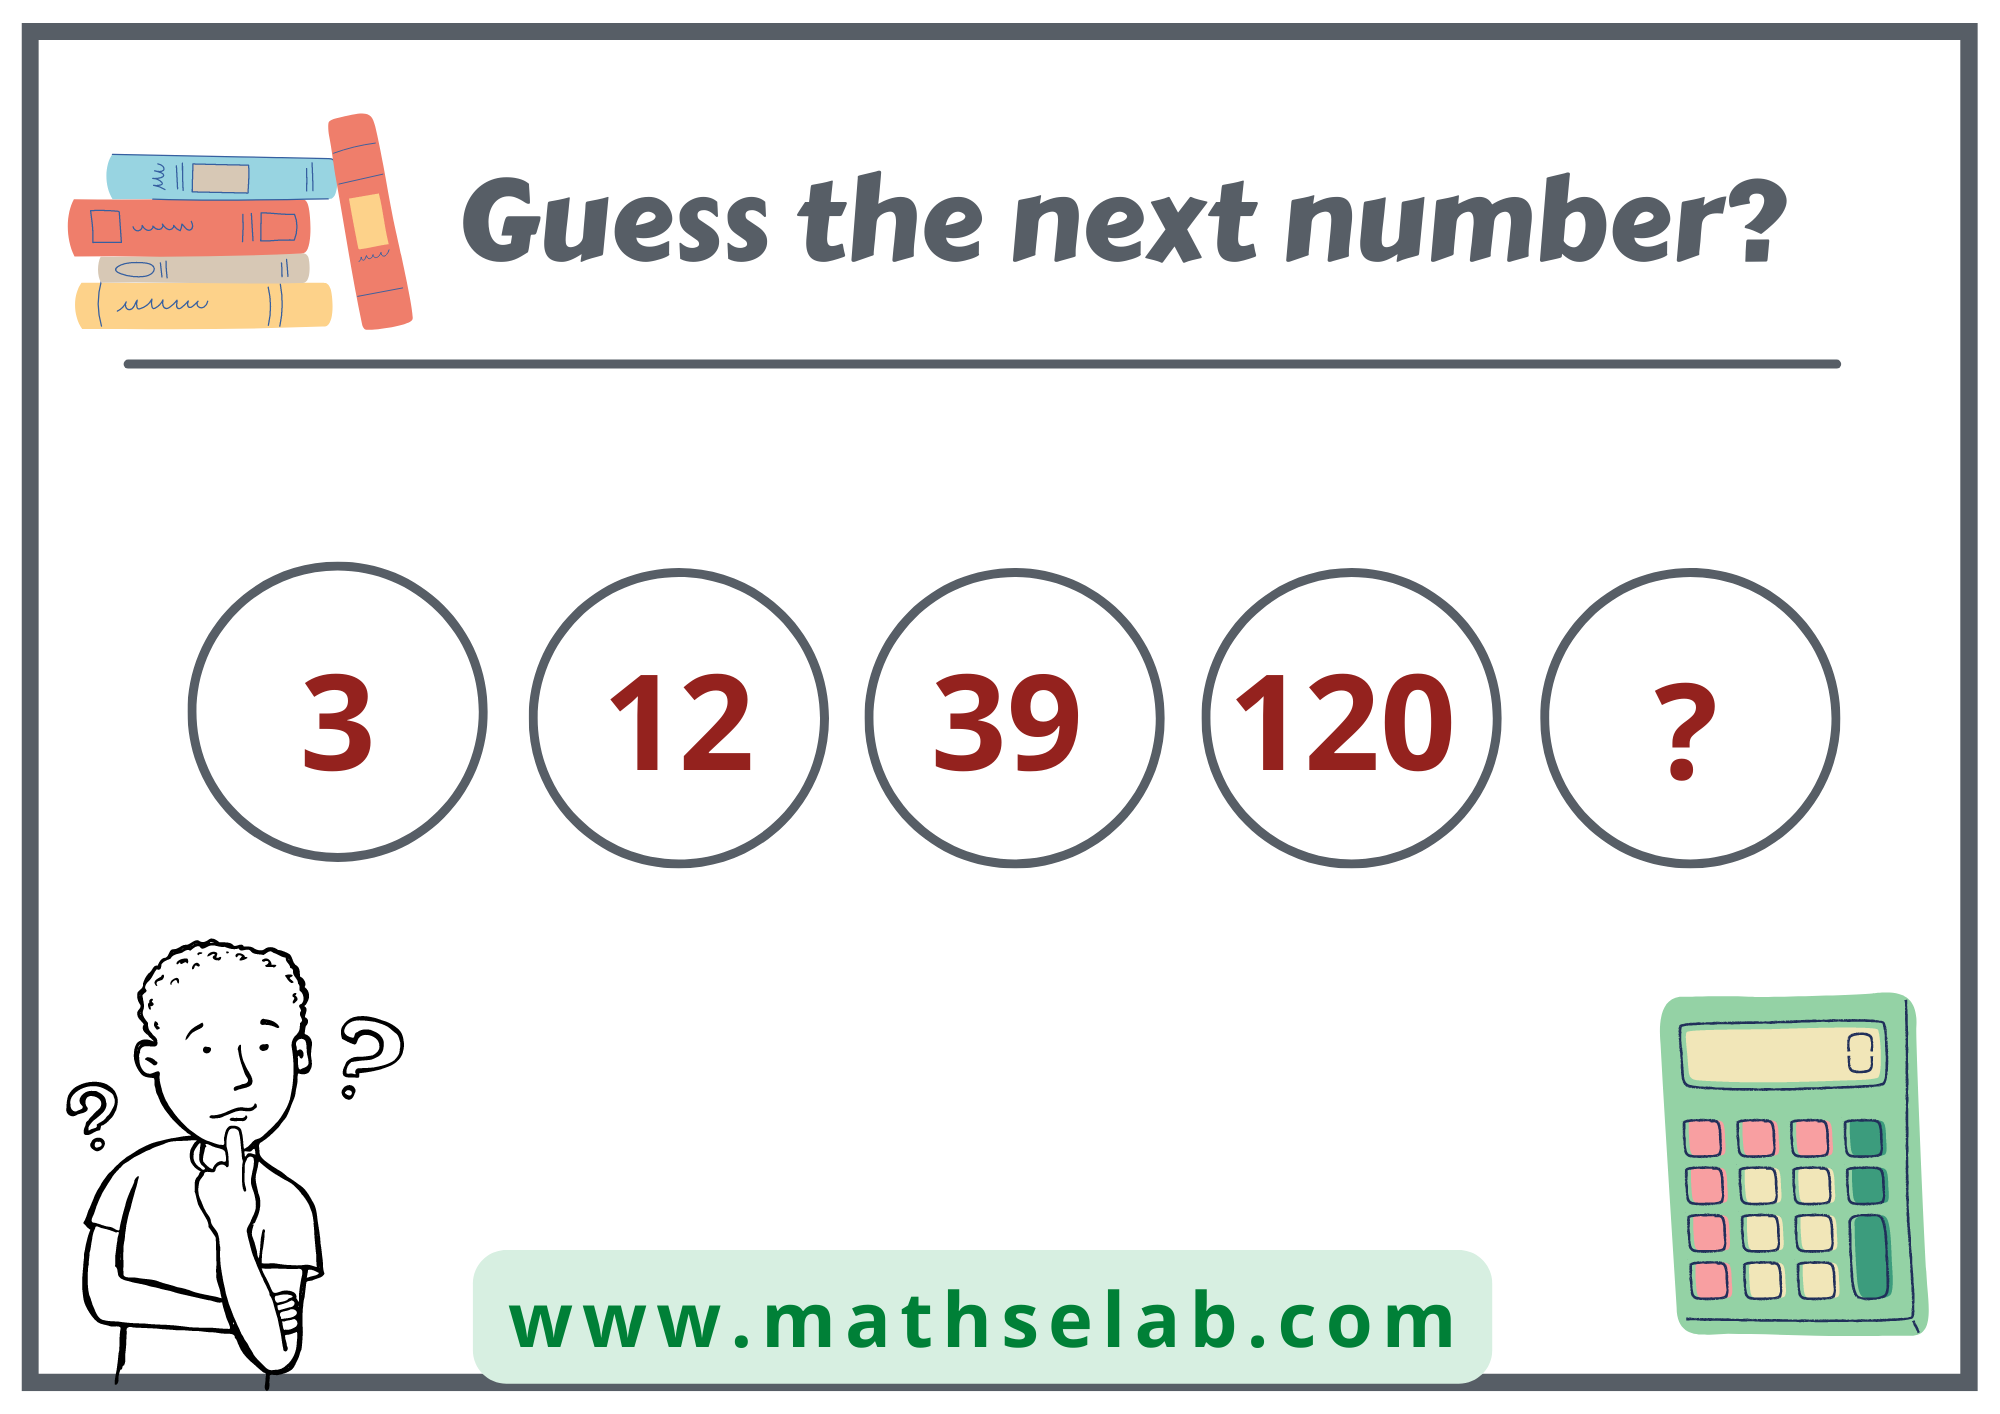 Guess-the-next-number-3-12-39-120-www.mathselab.com_